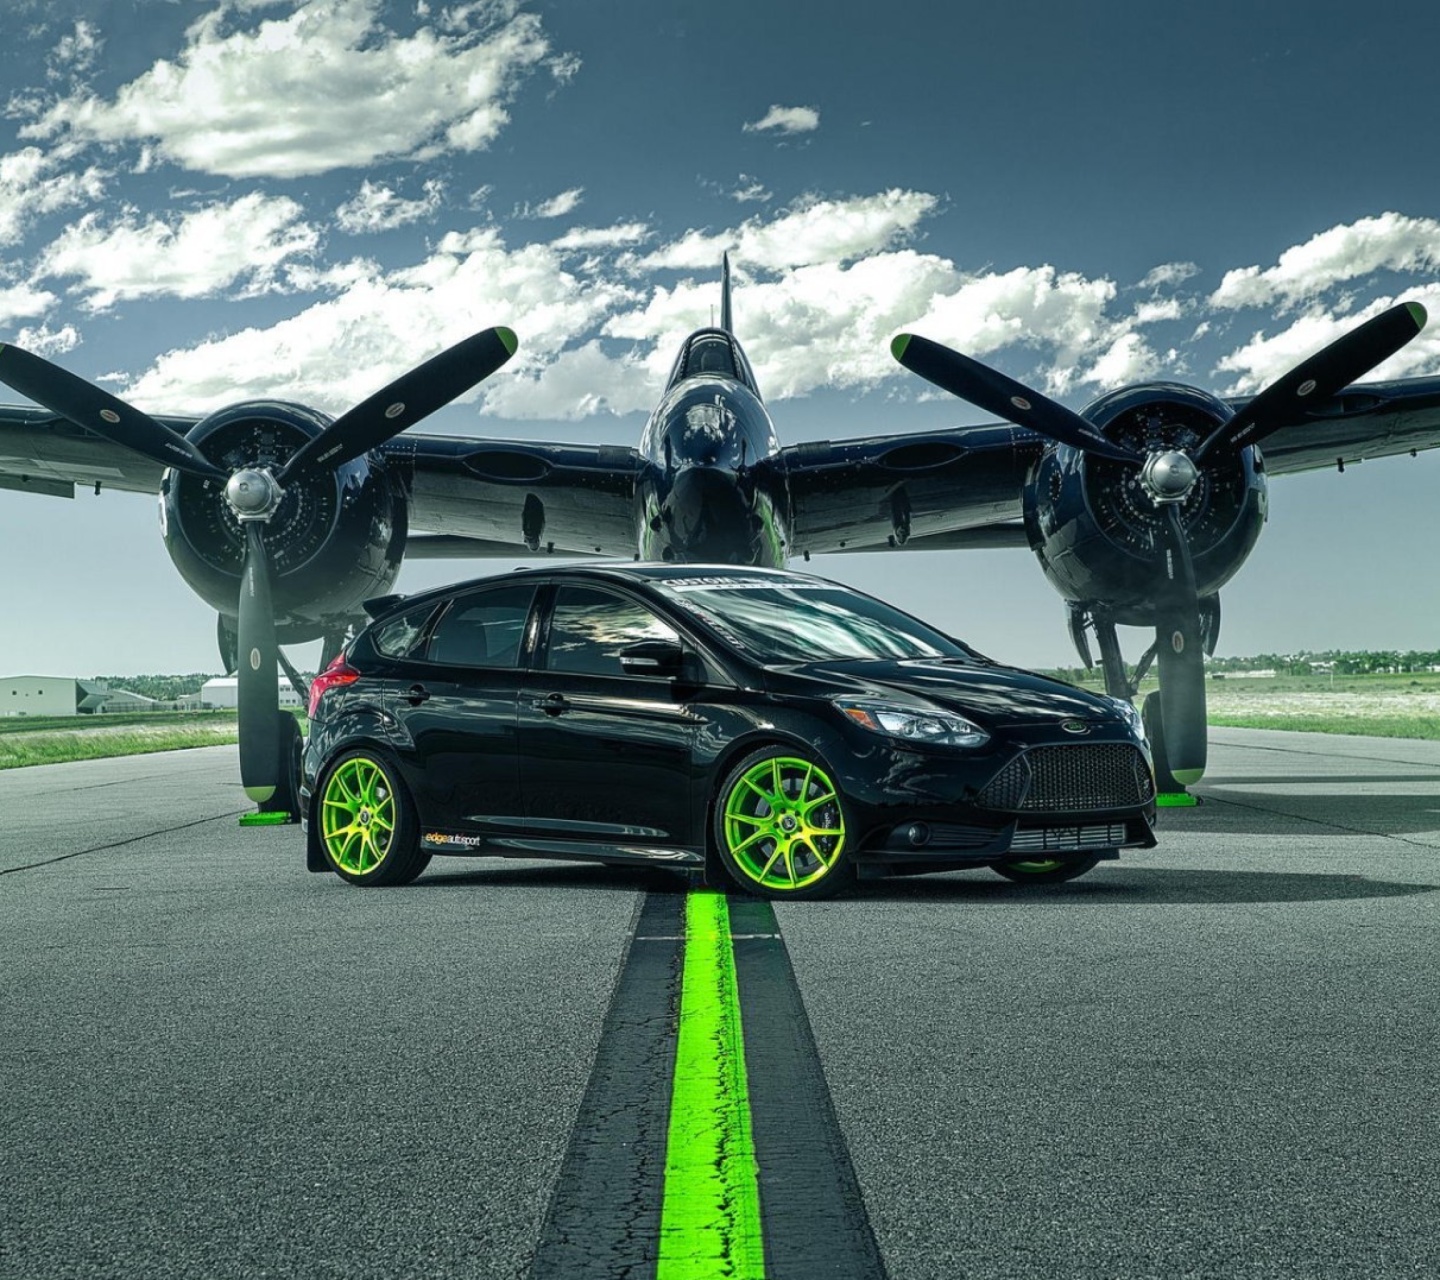 Das Ford Focus ST with Jet Wallpaper 1440x1280